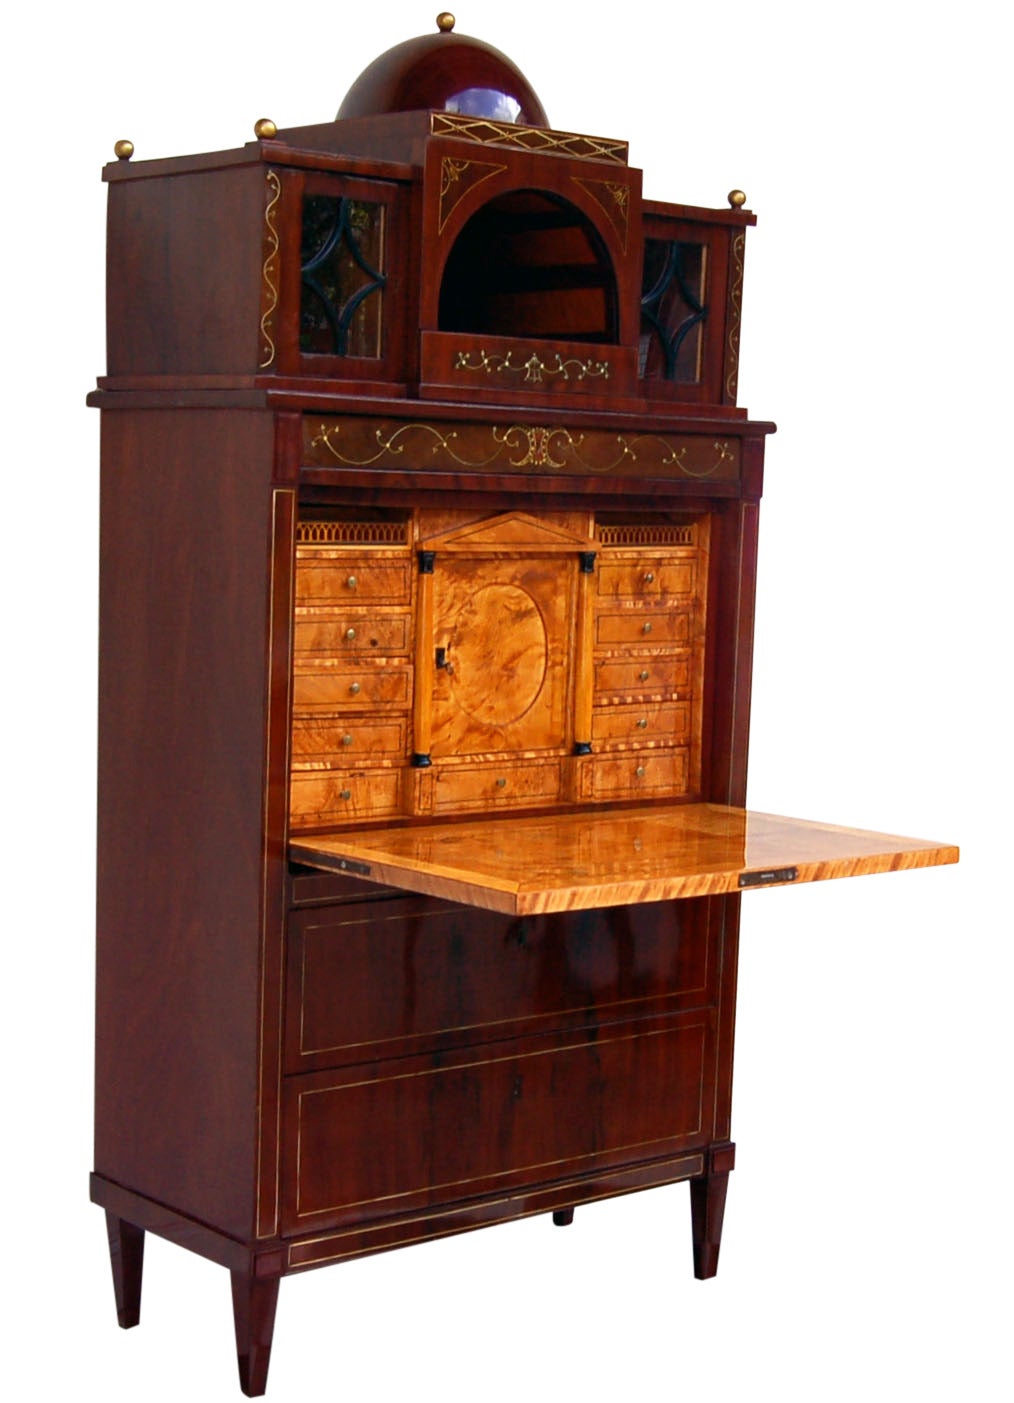 Neo-Classical period secretary from Hamburg, circa 1805. Made of mahogany and other real woods.

It is of the provenience of an important family from the Hanseatic city of Hamburg. The elegant centerpiece resembles a temple and is made of